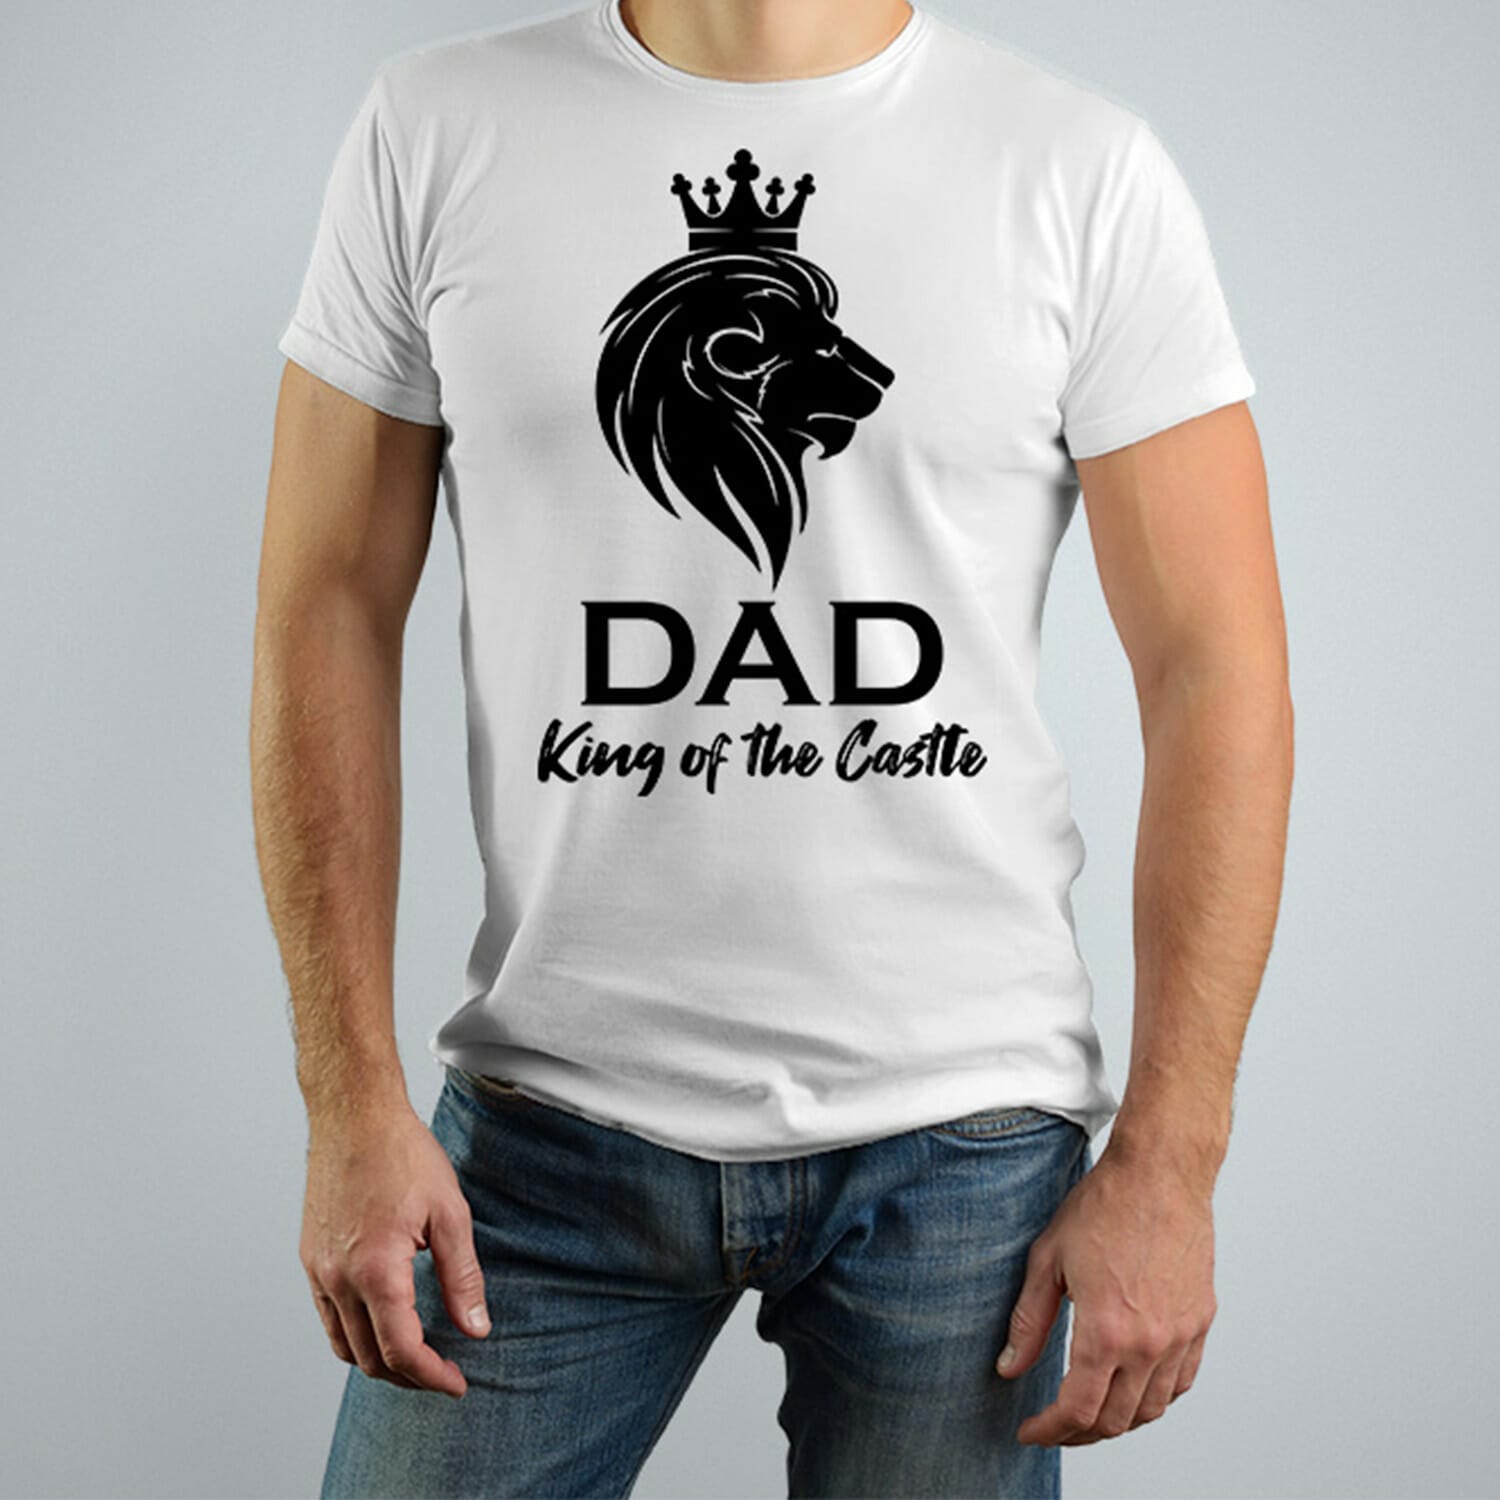 Dad king of the castle tshirt design